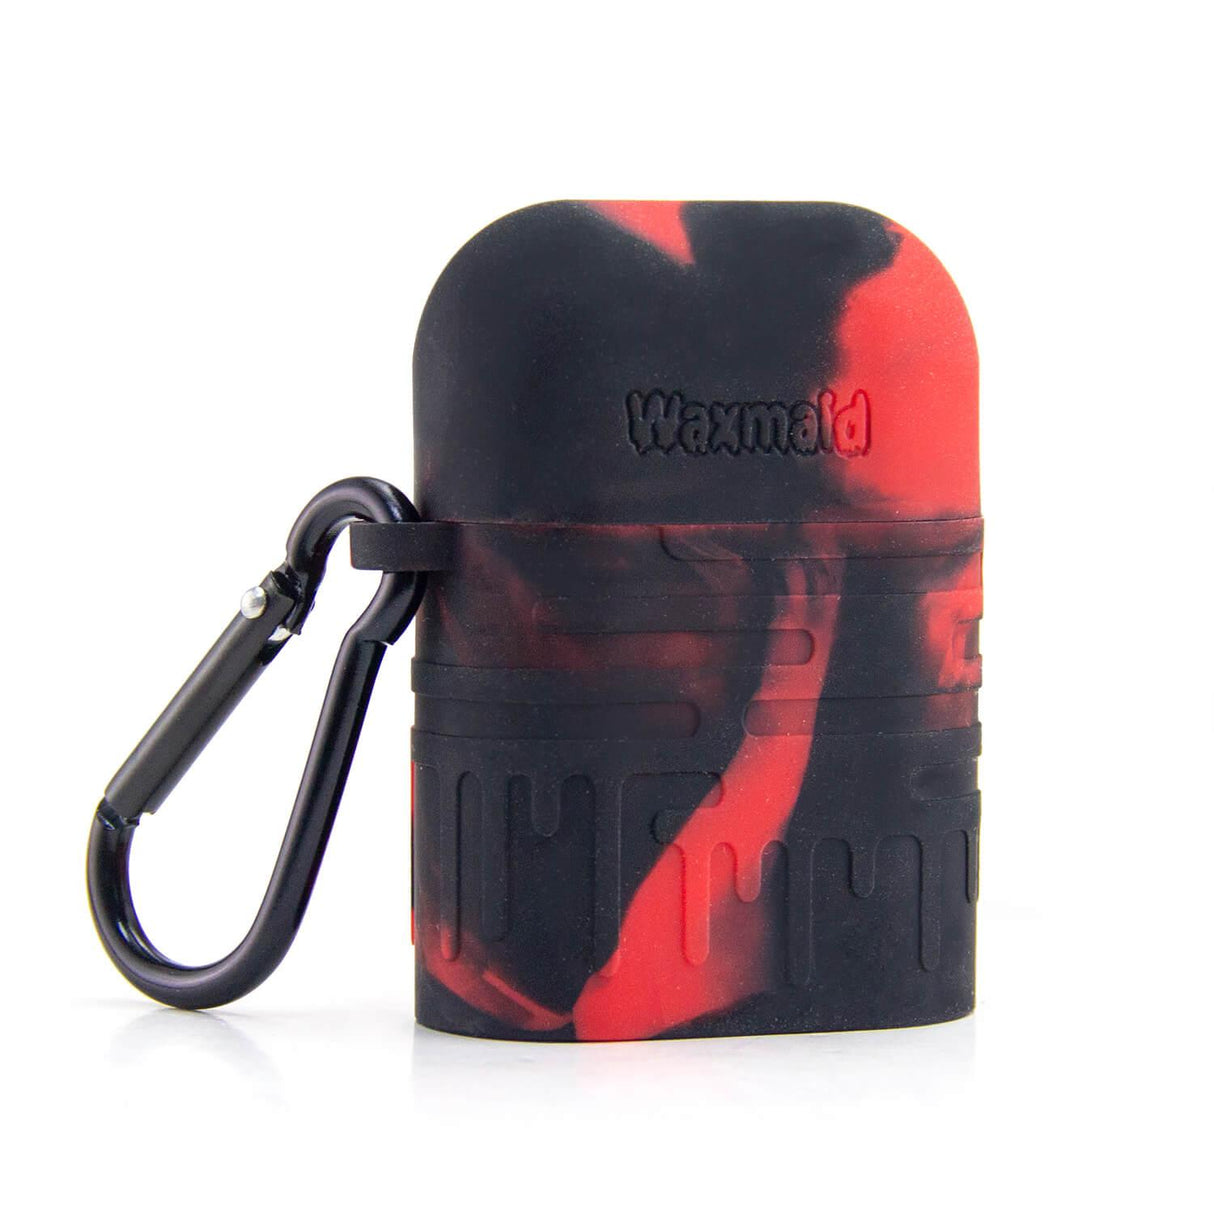 PILOT DIARY Silicone Dugout with One Hitter in Red/Black with Carabiner Clip - Front View